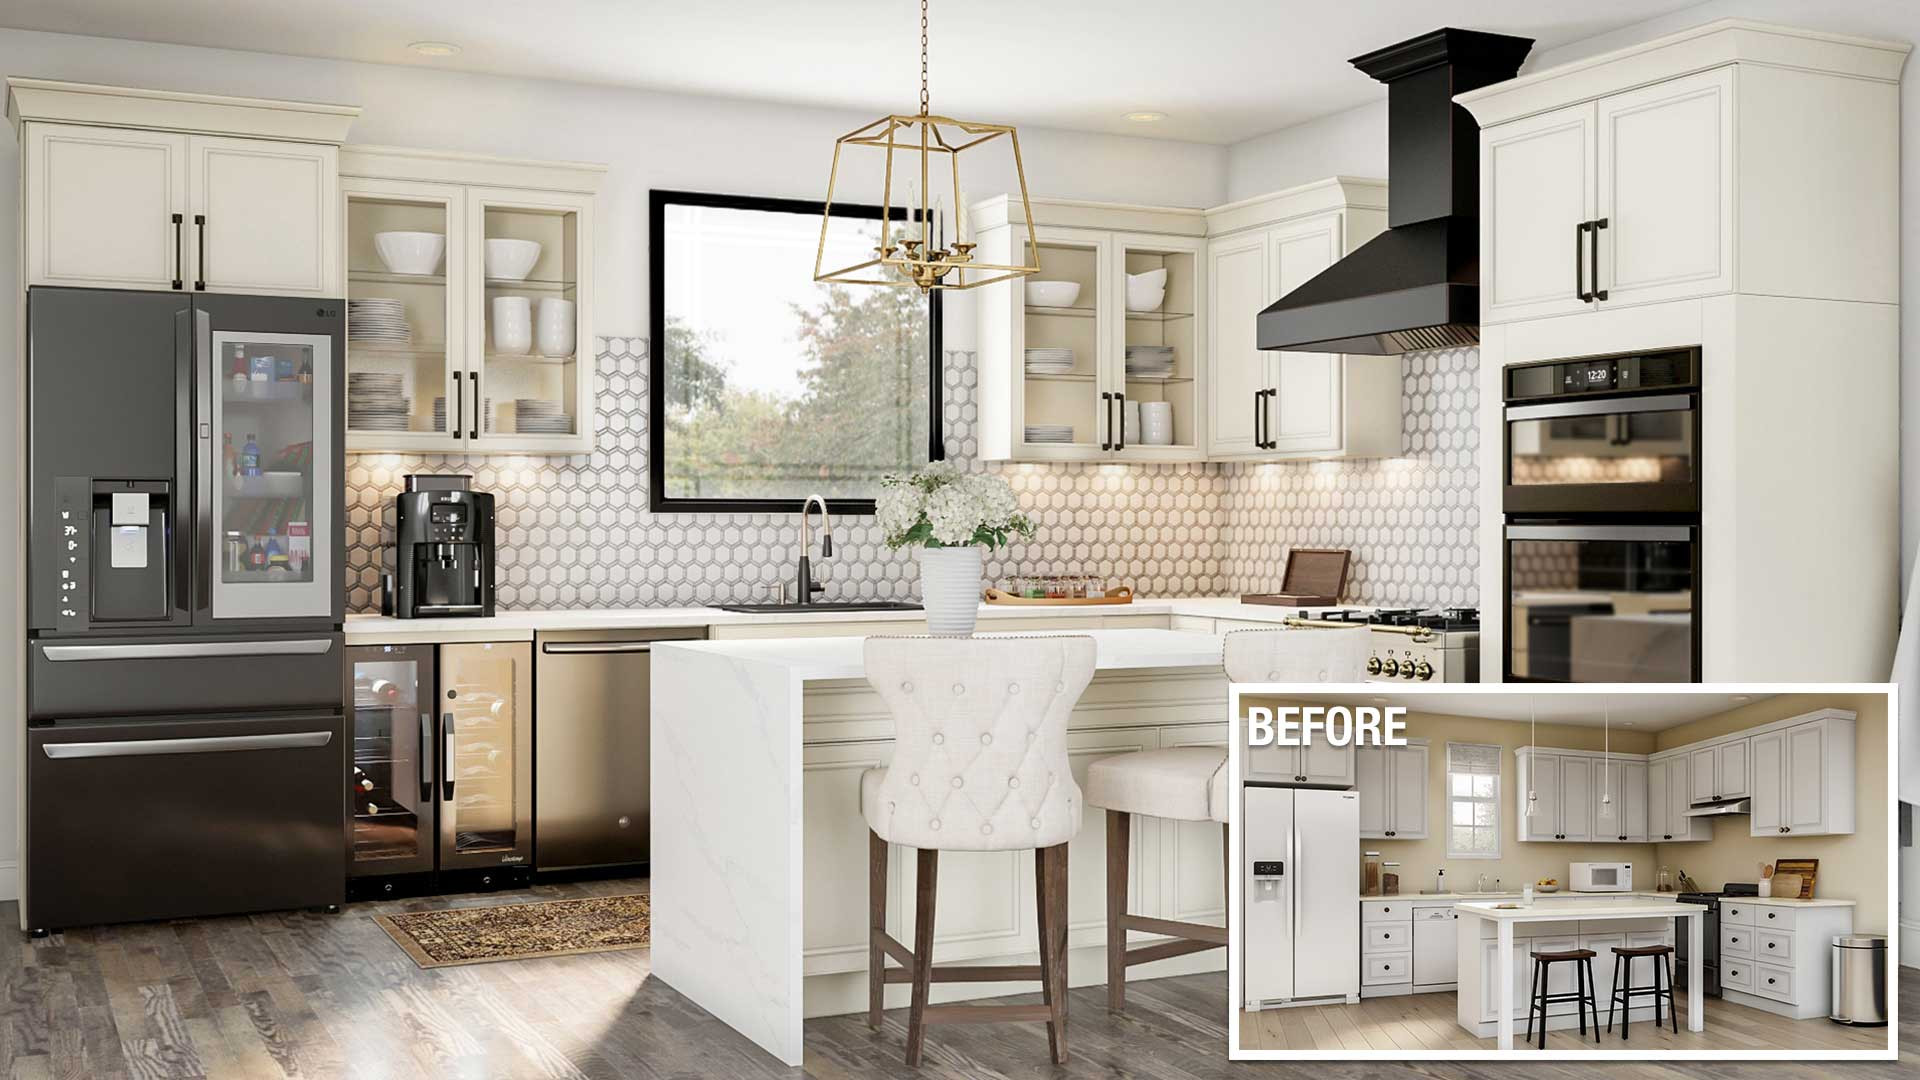 Home Depot Kitchen Remodel Cost
 Cost to Remodel a Kitchen The Home Depot